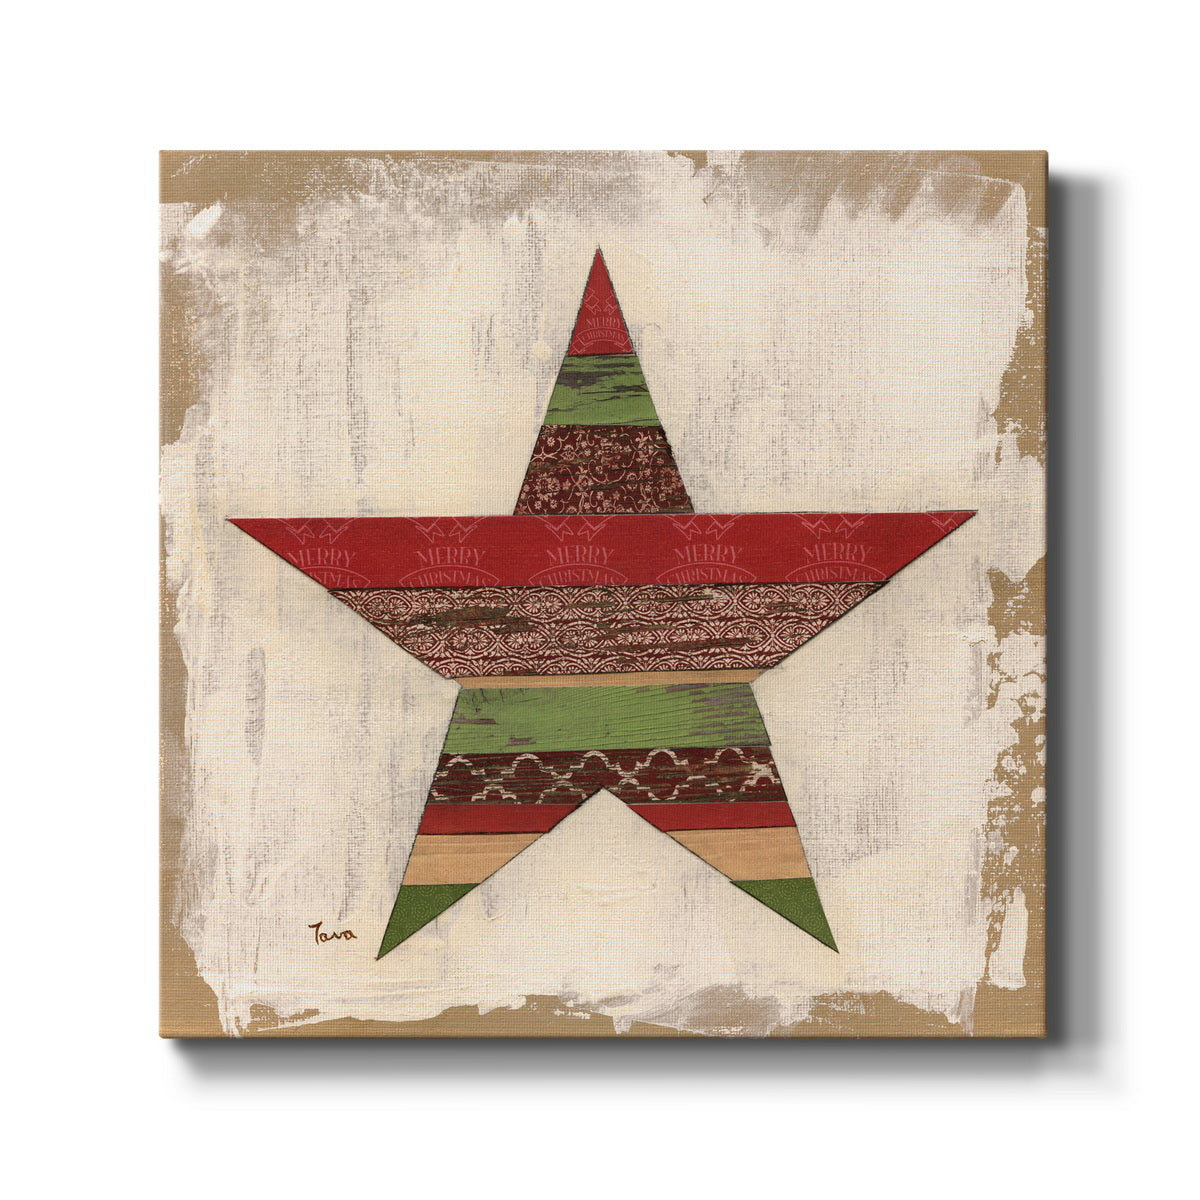 Christmas Star-Premium Gallery Wrapped Canvas - Ready to Hang